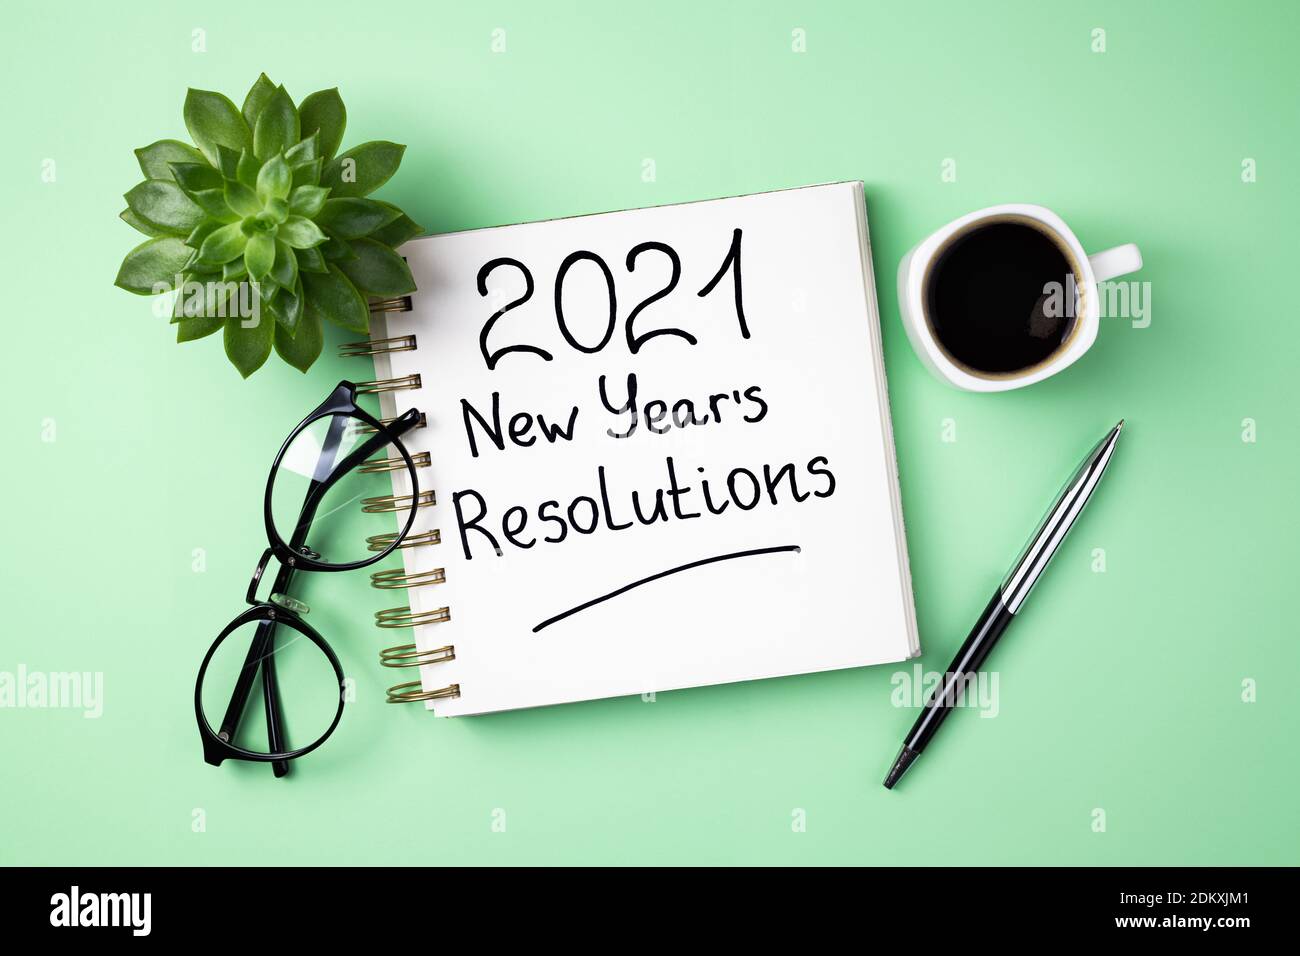 New year 2021 goals on desk. 2021 goals with open notebook, coffee cup, eyeglasses, plant succulent on green background. Goals, resolutions, plan, str Stock Photo